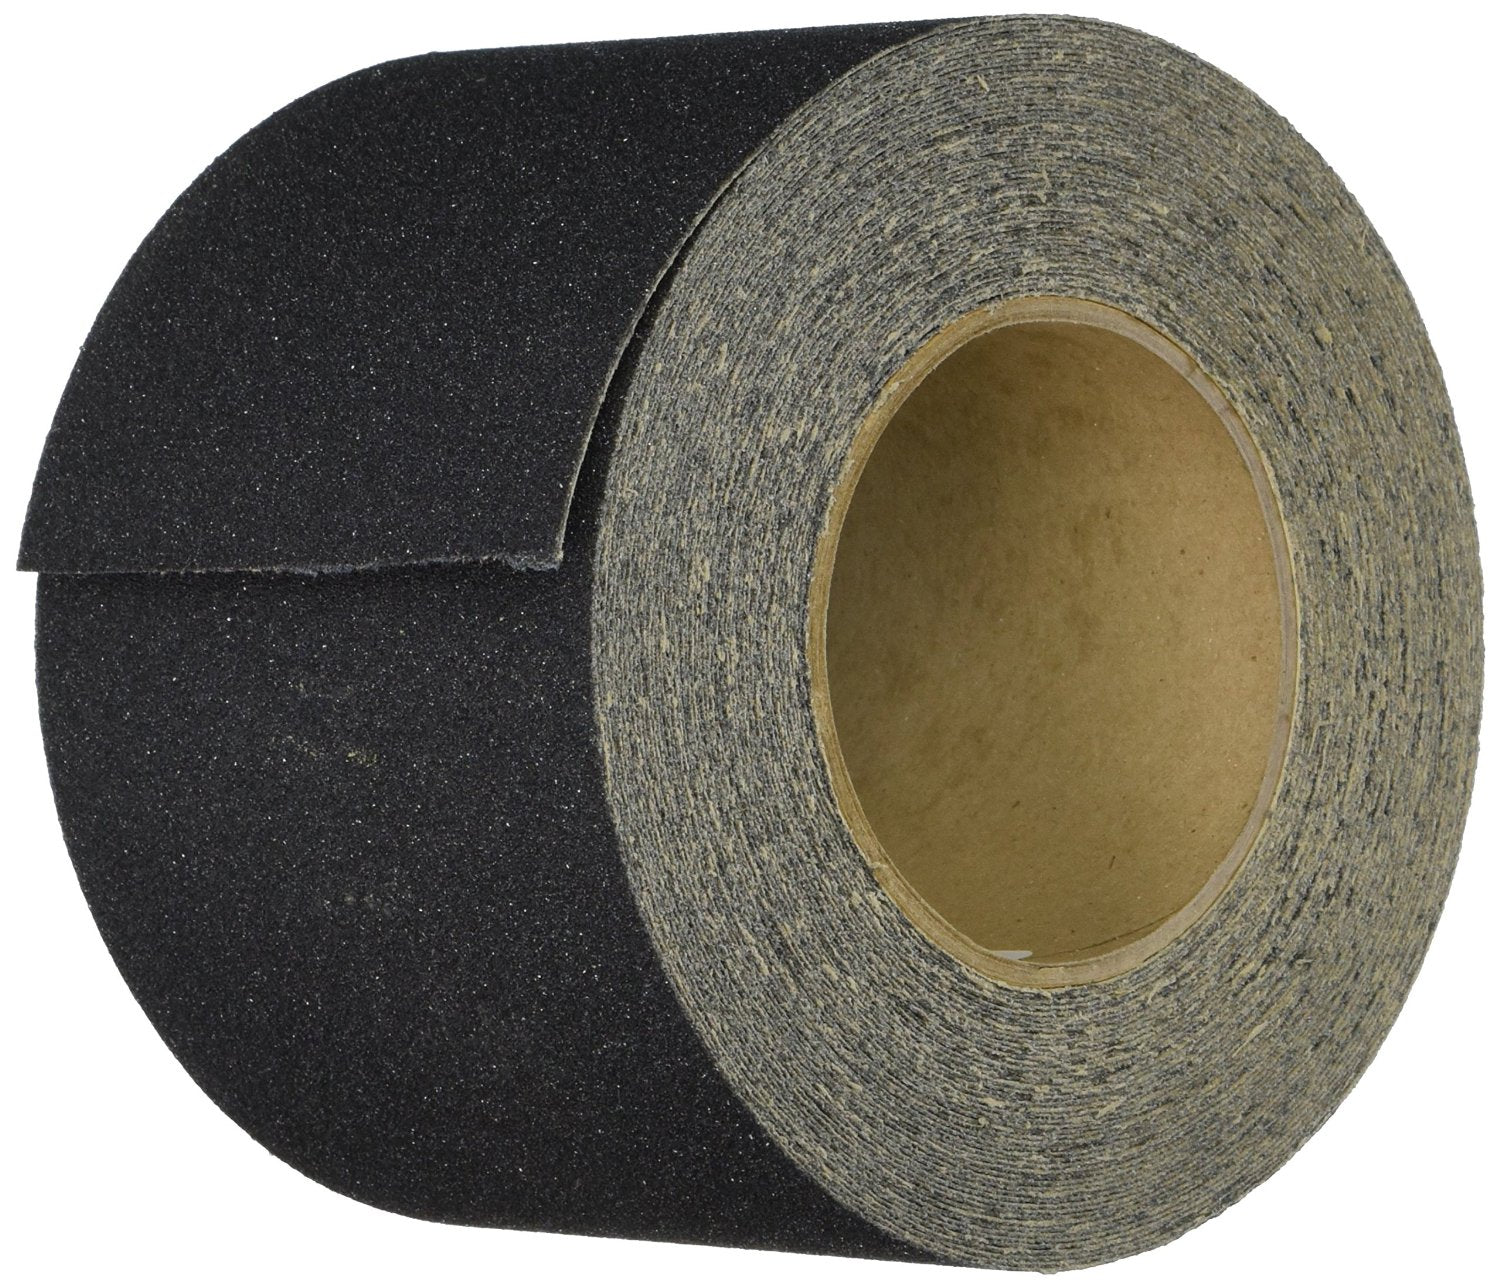 SPECIAL OFFER - 50% Savings - 4" x 60 Foot Roll General Purpose 60 Grit Non-Slip Tape - BLACK - Limited Stock